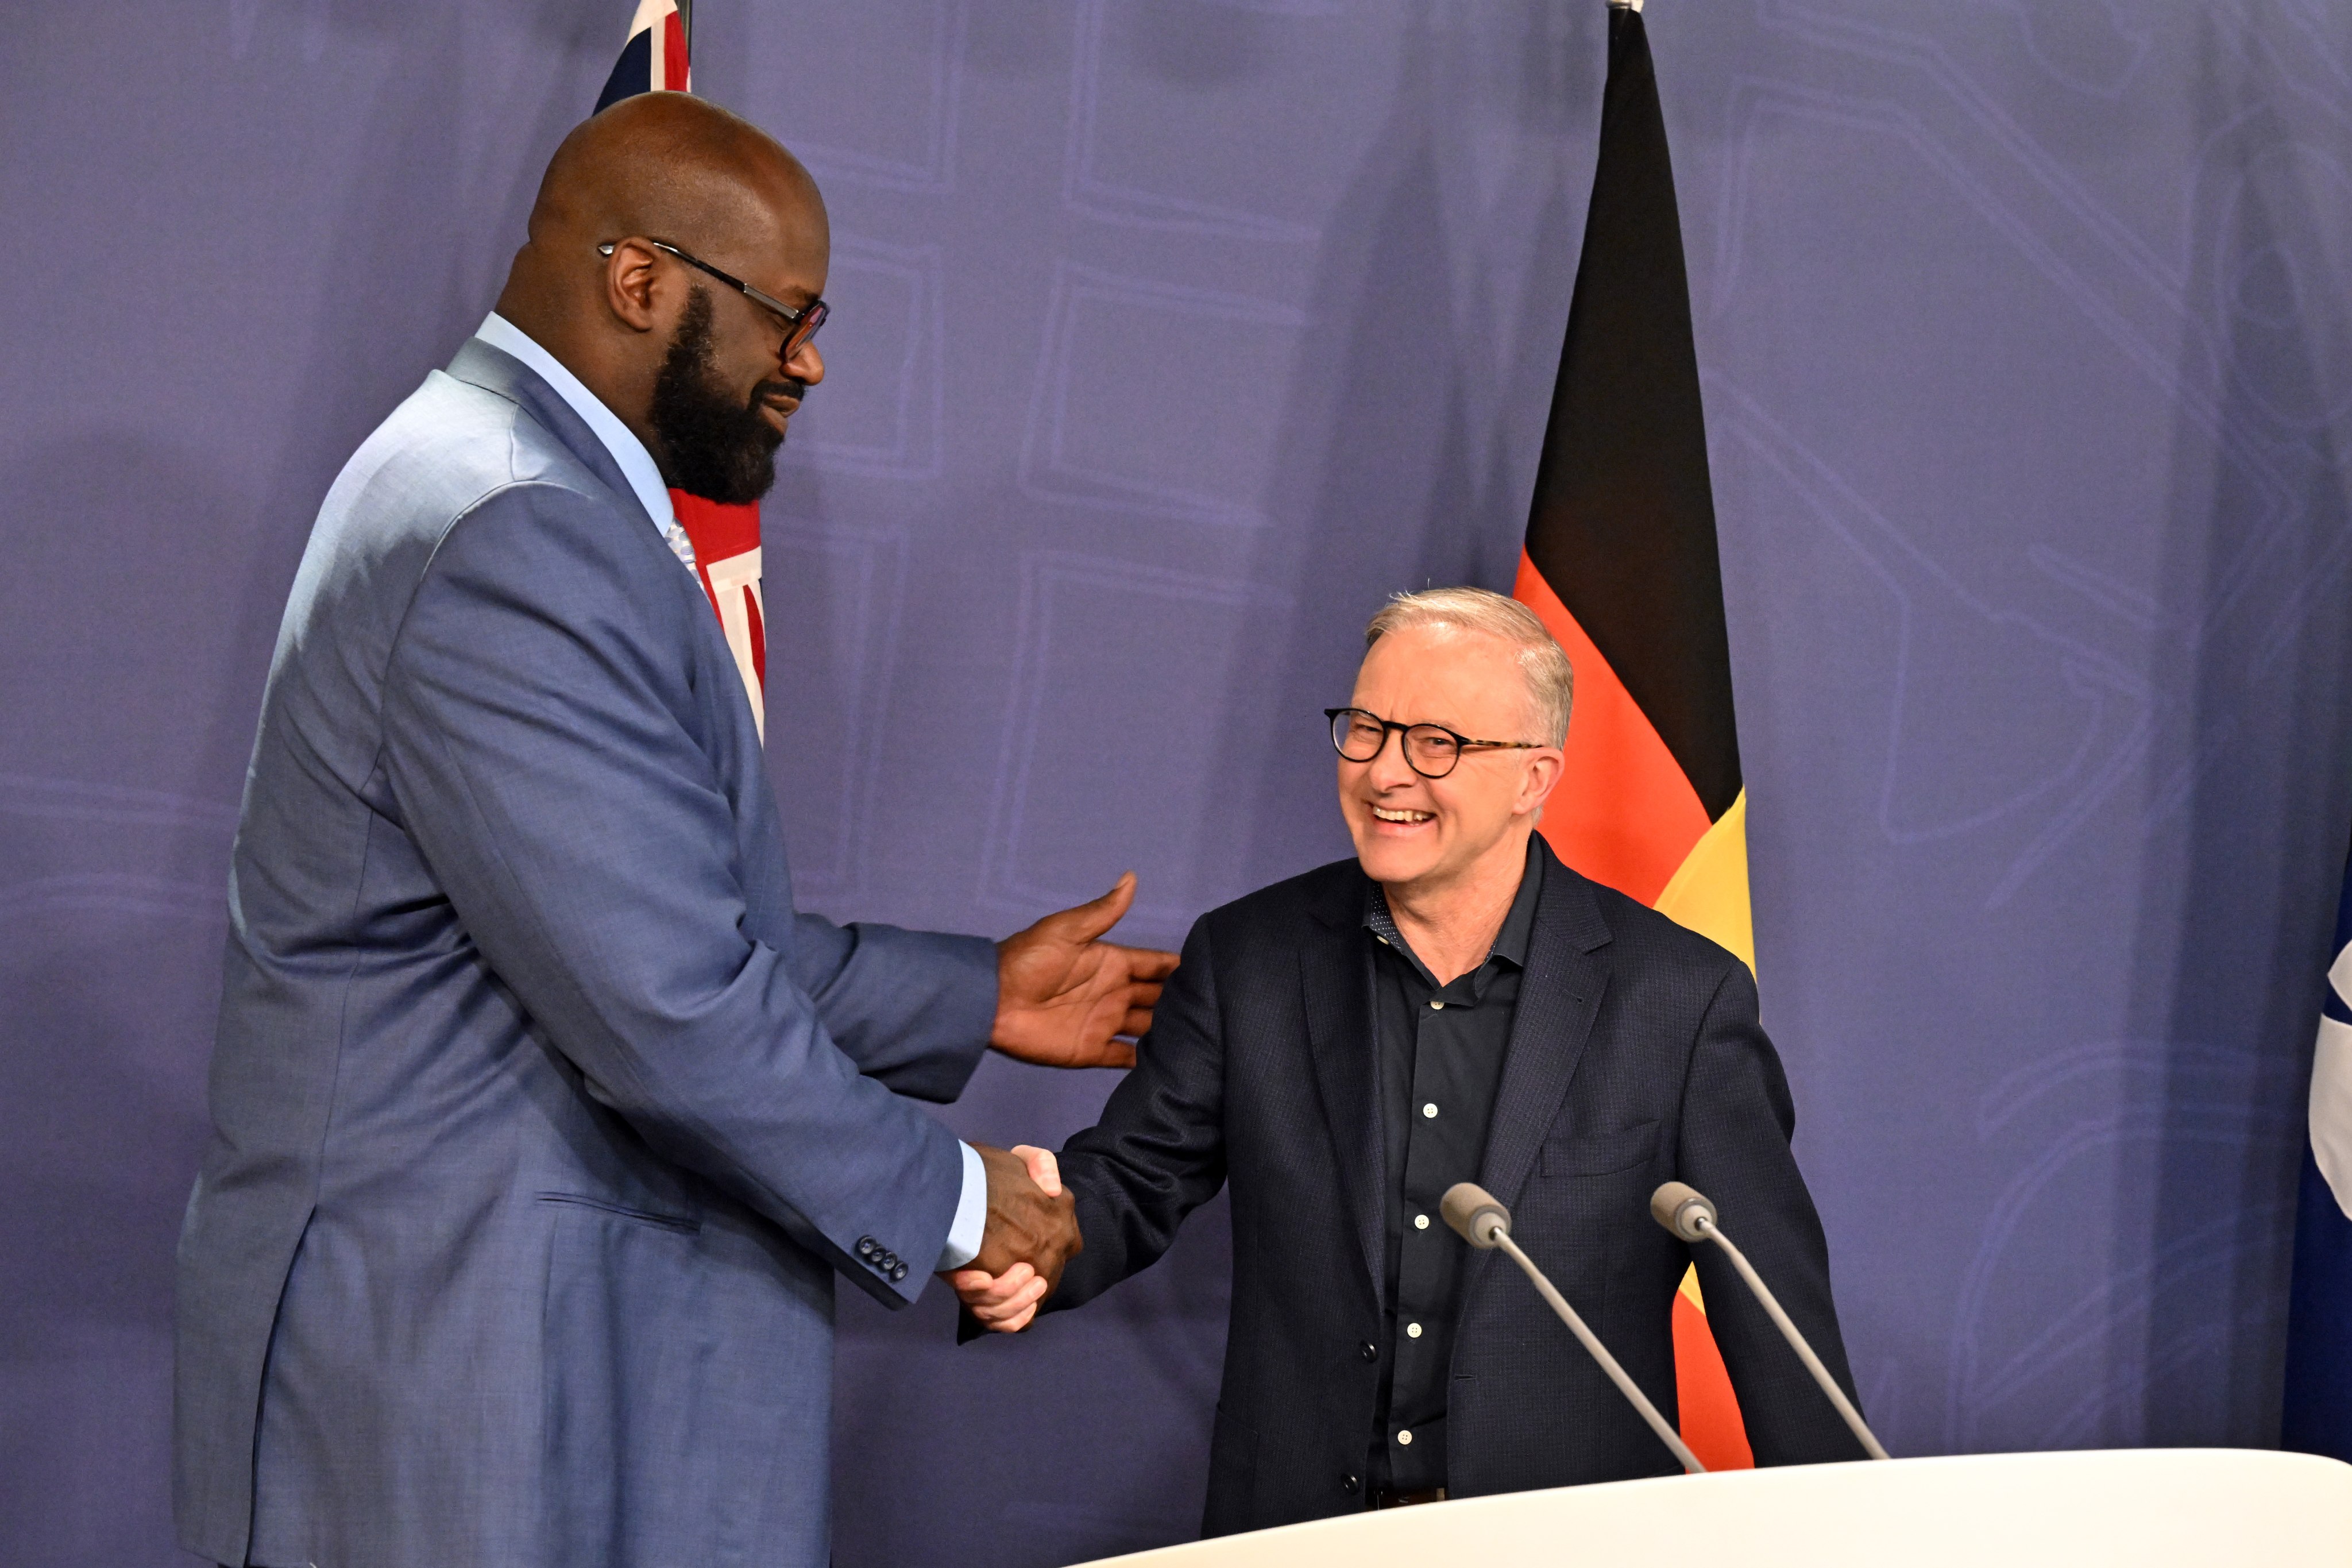 Ex-NBA star Shaquille O’Neal and Australian PM Anthony Albanese in Sydney. Photo: EPA-EFE